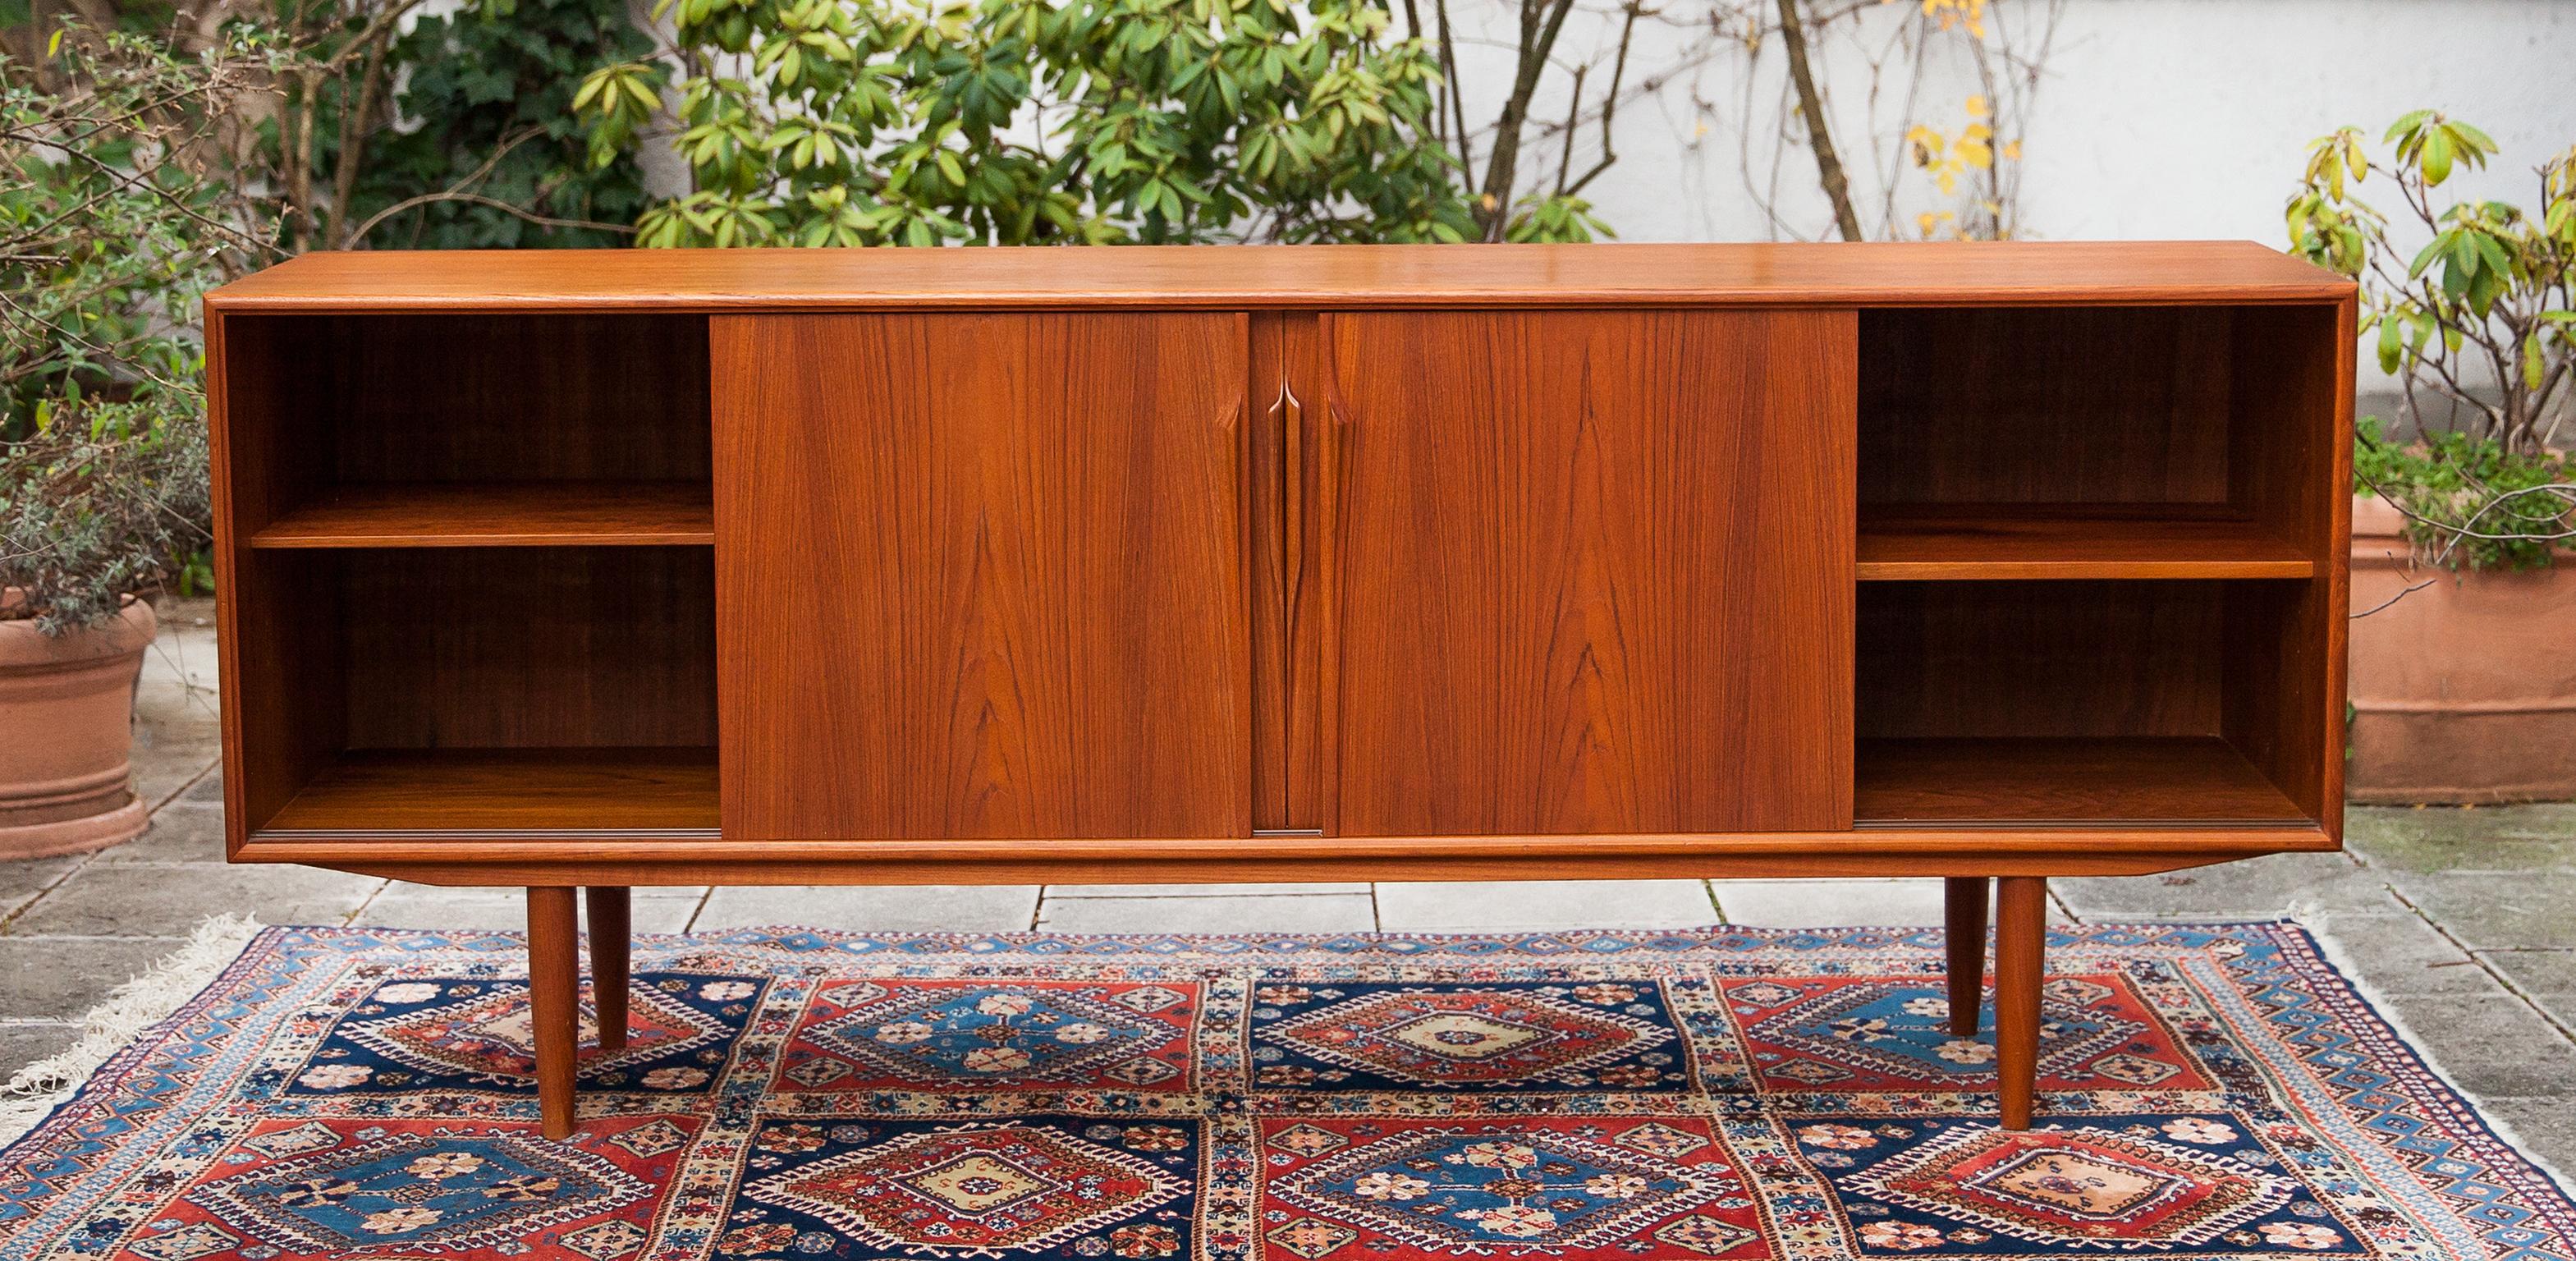 Wonderful midcentury teak sideboard designed by Gunni Omann for Omann Jun Mobelfabrik. The bevel-edged case sits on tapered legs and features four sliding doors with long organic handles. Inside are two adjustable shelves and, three tray drawers.